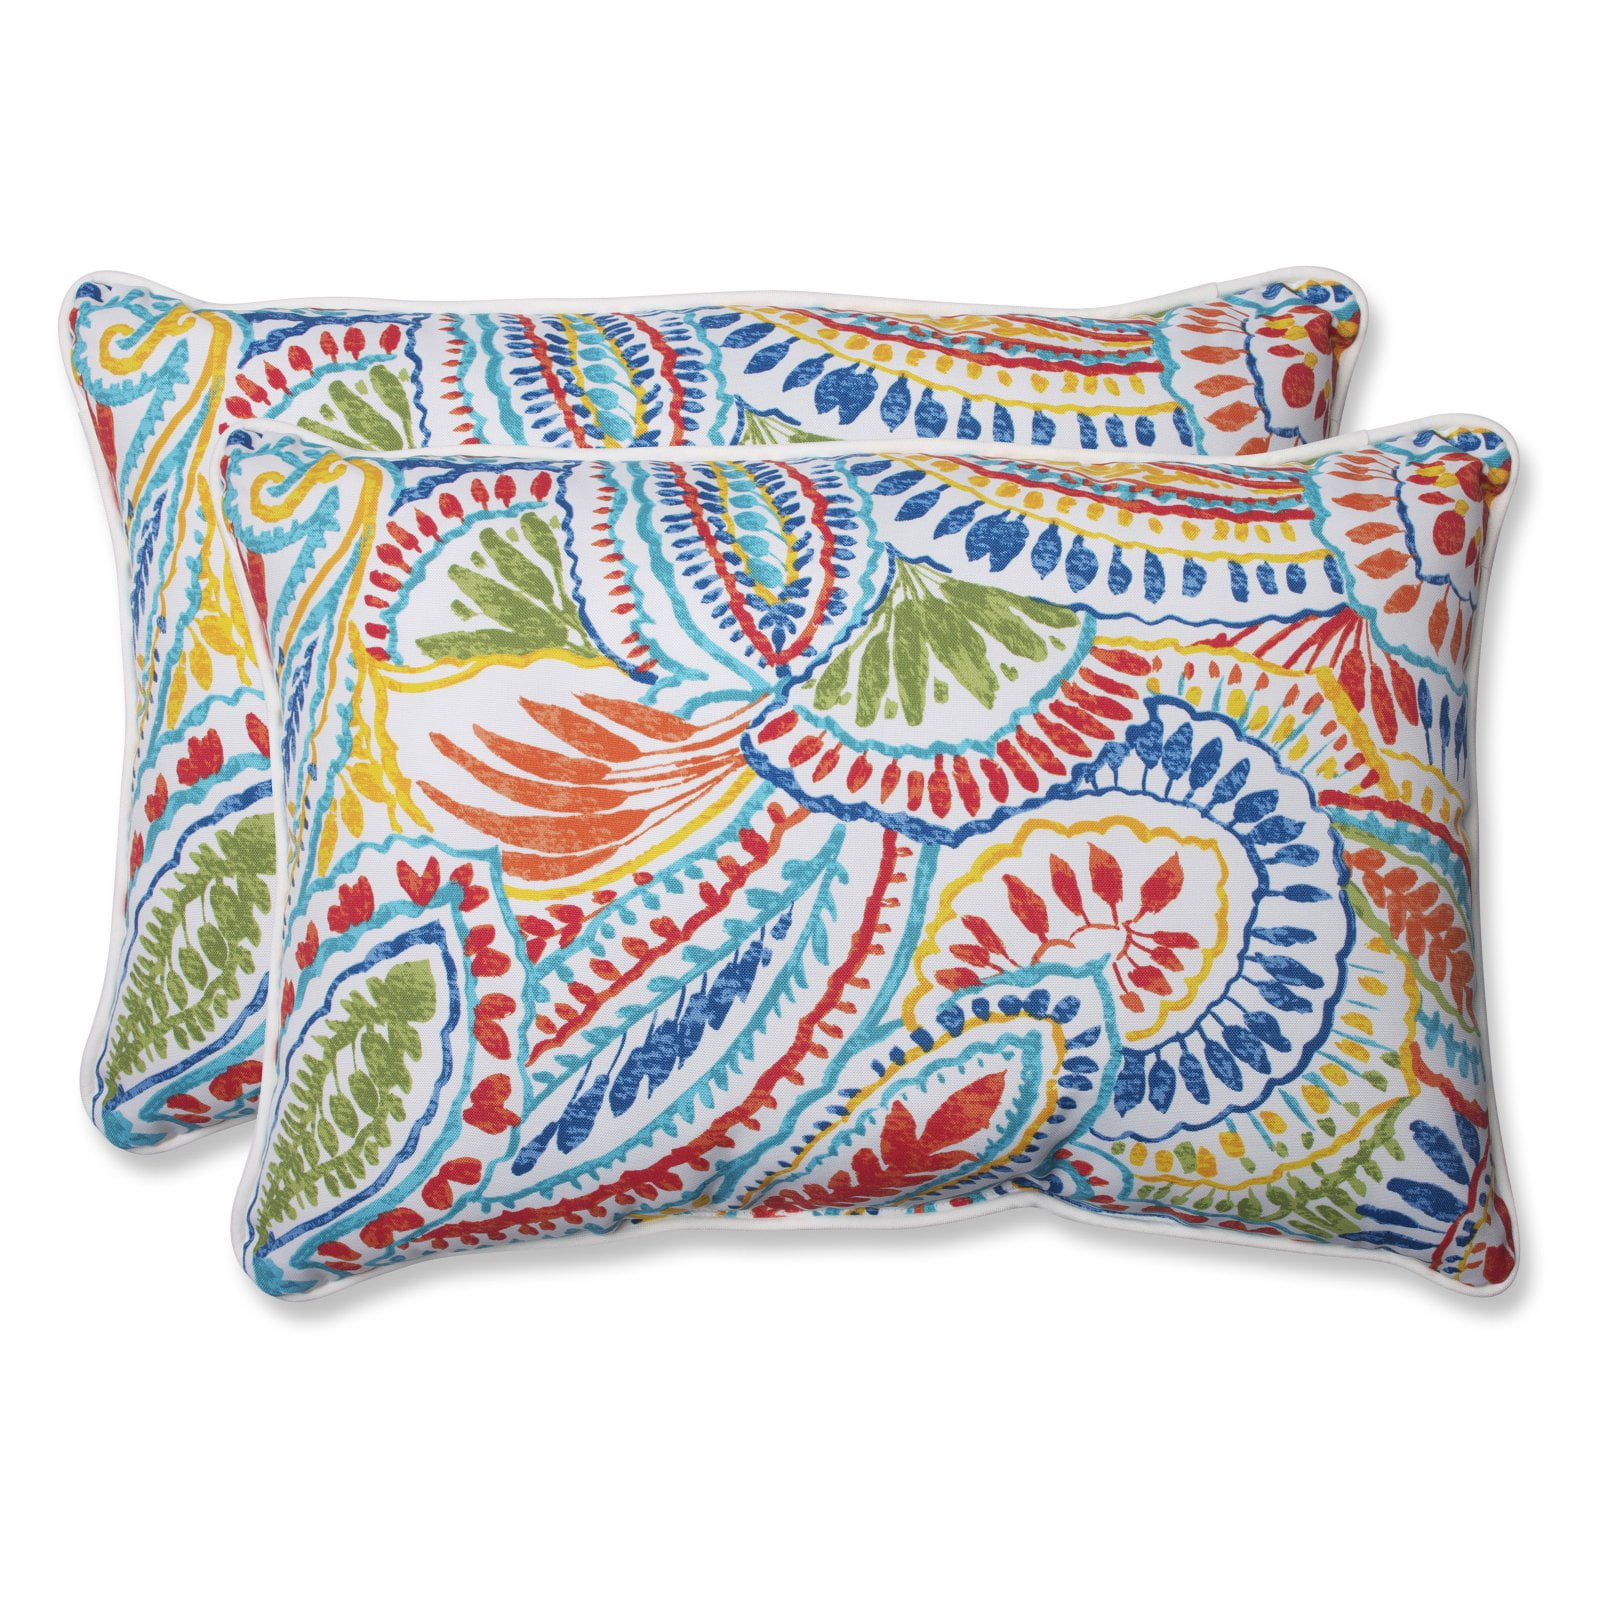 Set of 2 Multicolored Pillow Perfect Outdoor Ummi Throw Pillow 18.5-Inch 